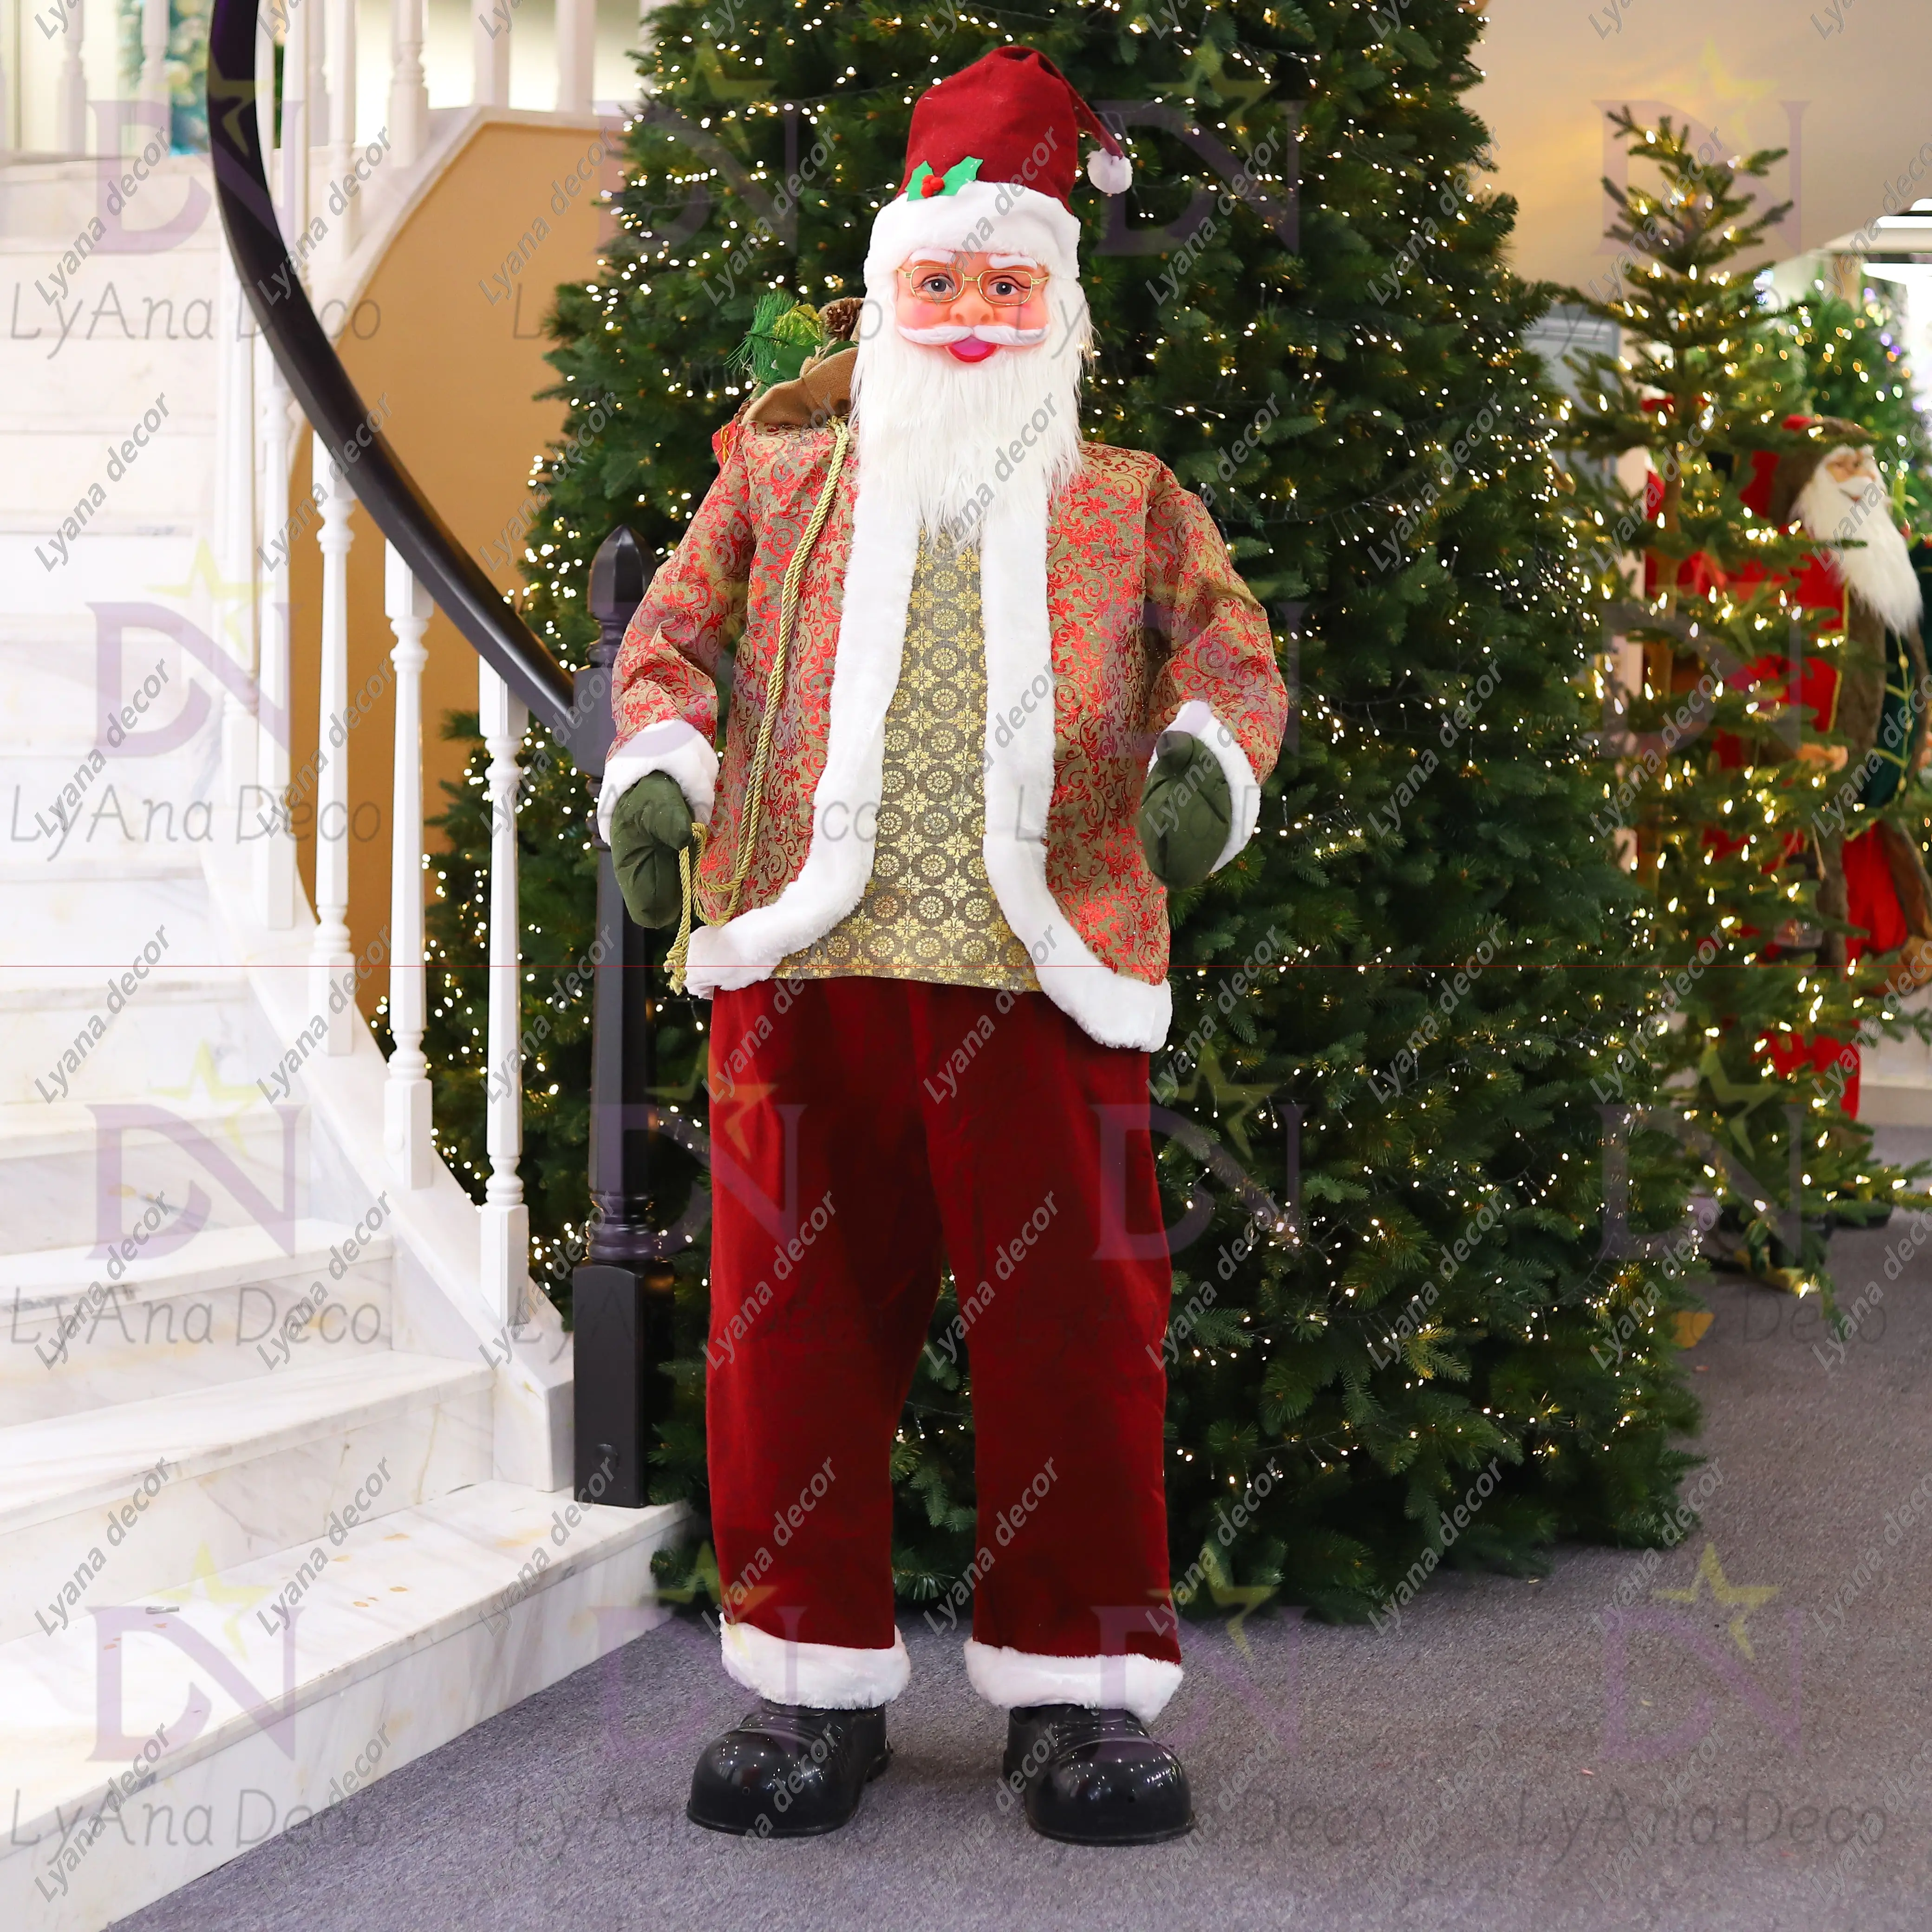 Life Size Outdoor 6ft Dancing Santa Claus Fabric Christmas Ornament bluetooth Sing Santa and Decoration Holiday Gift